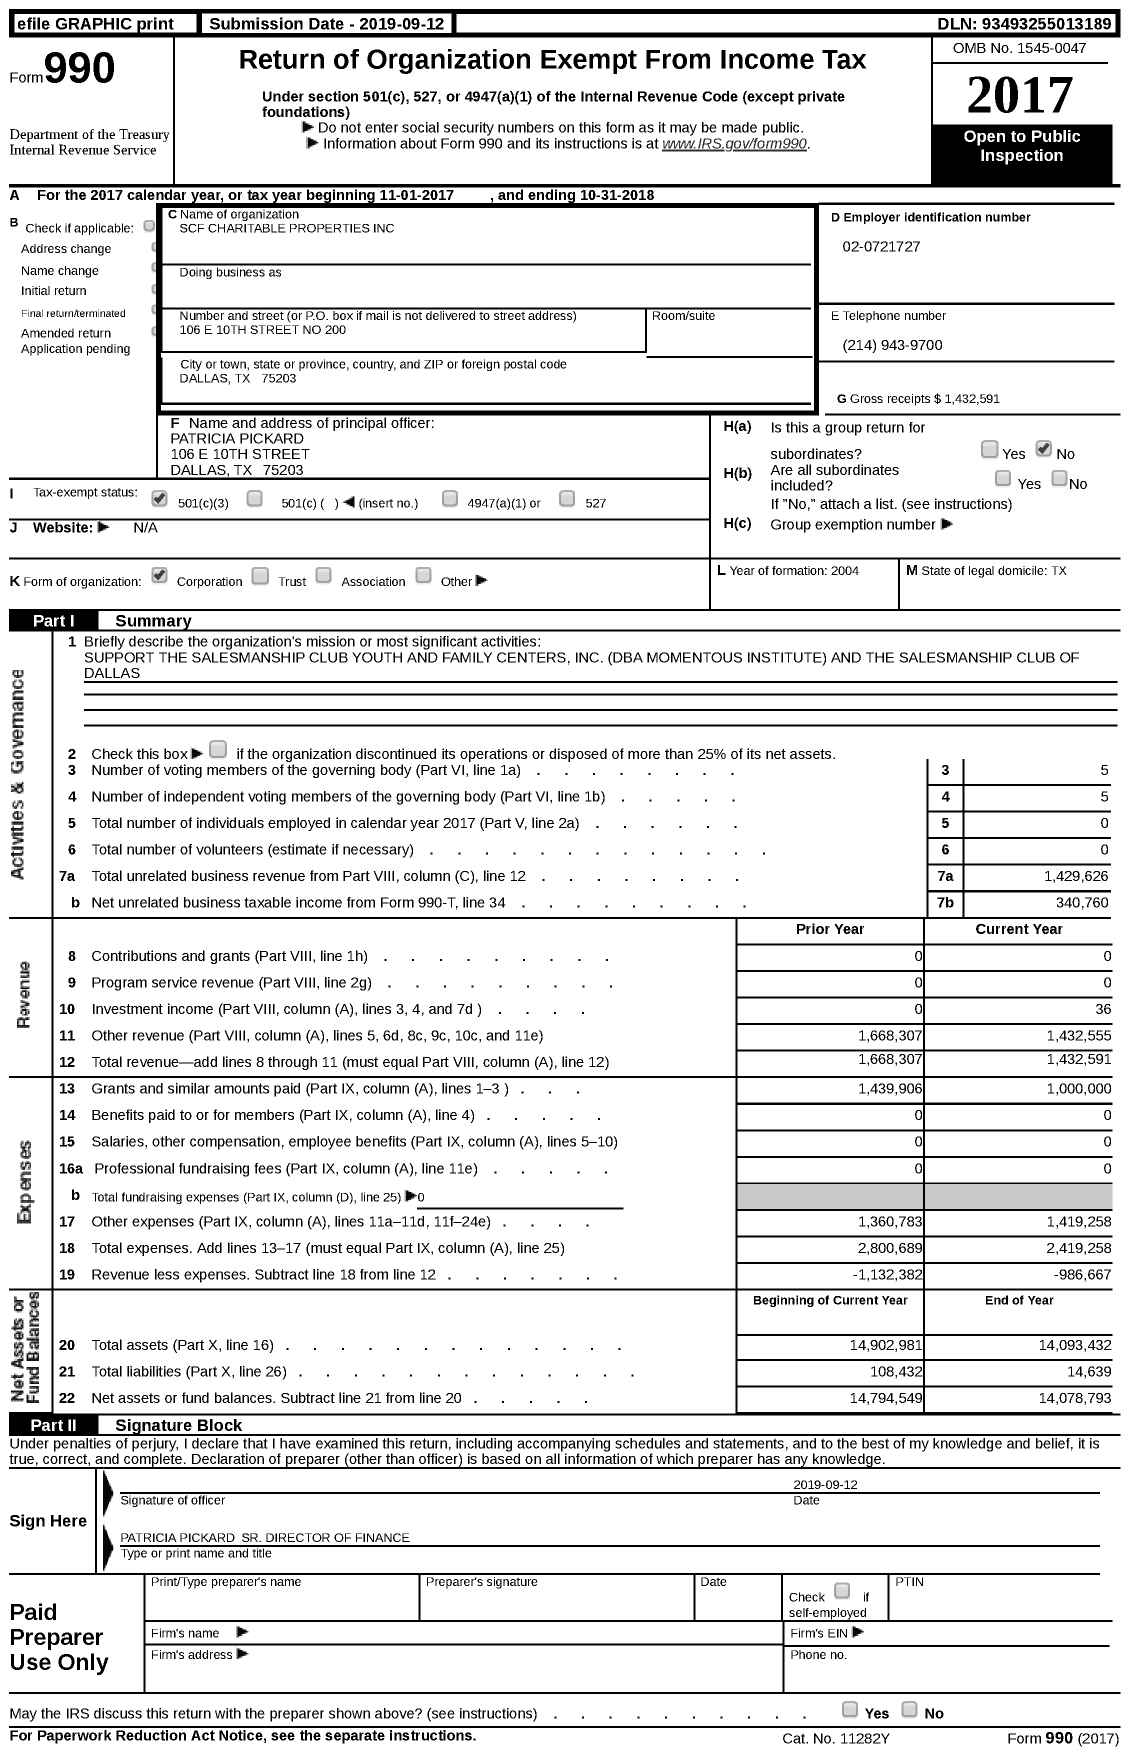 Image of first page of 2017 Form 990 for SCF Charitable Properties